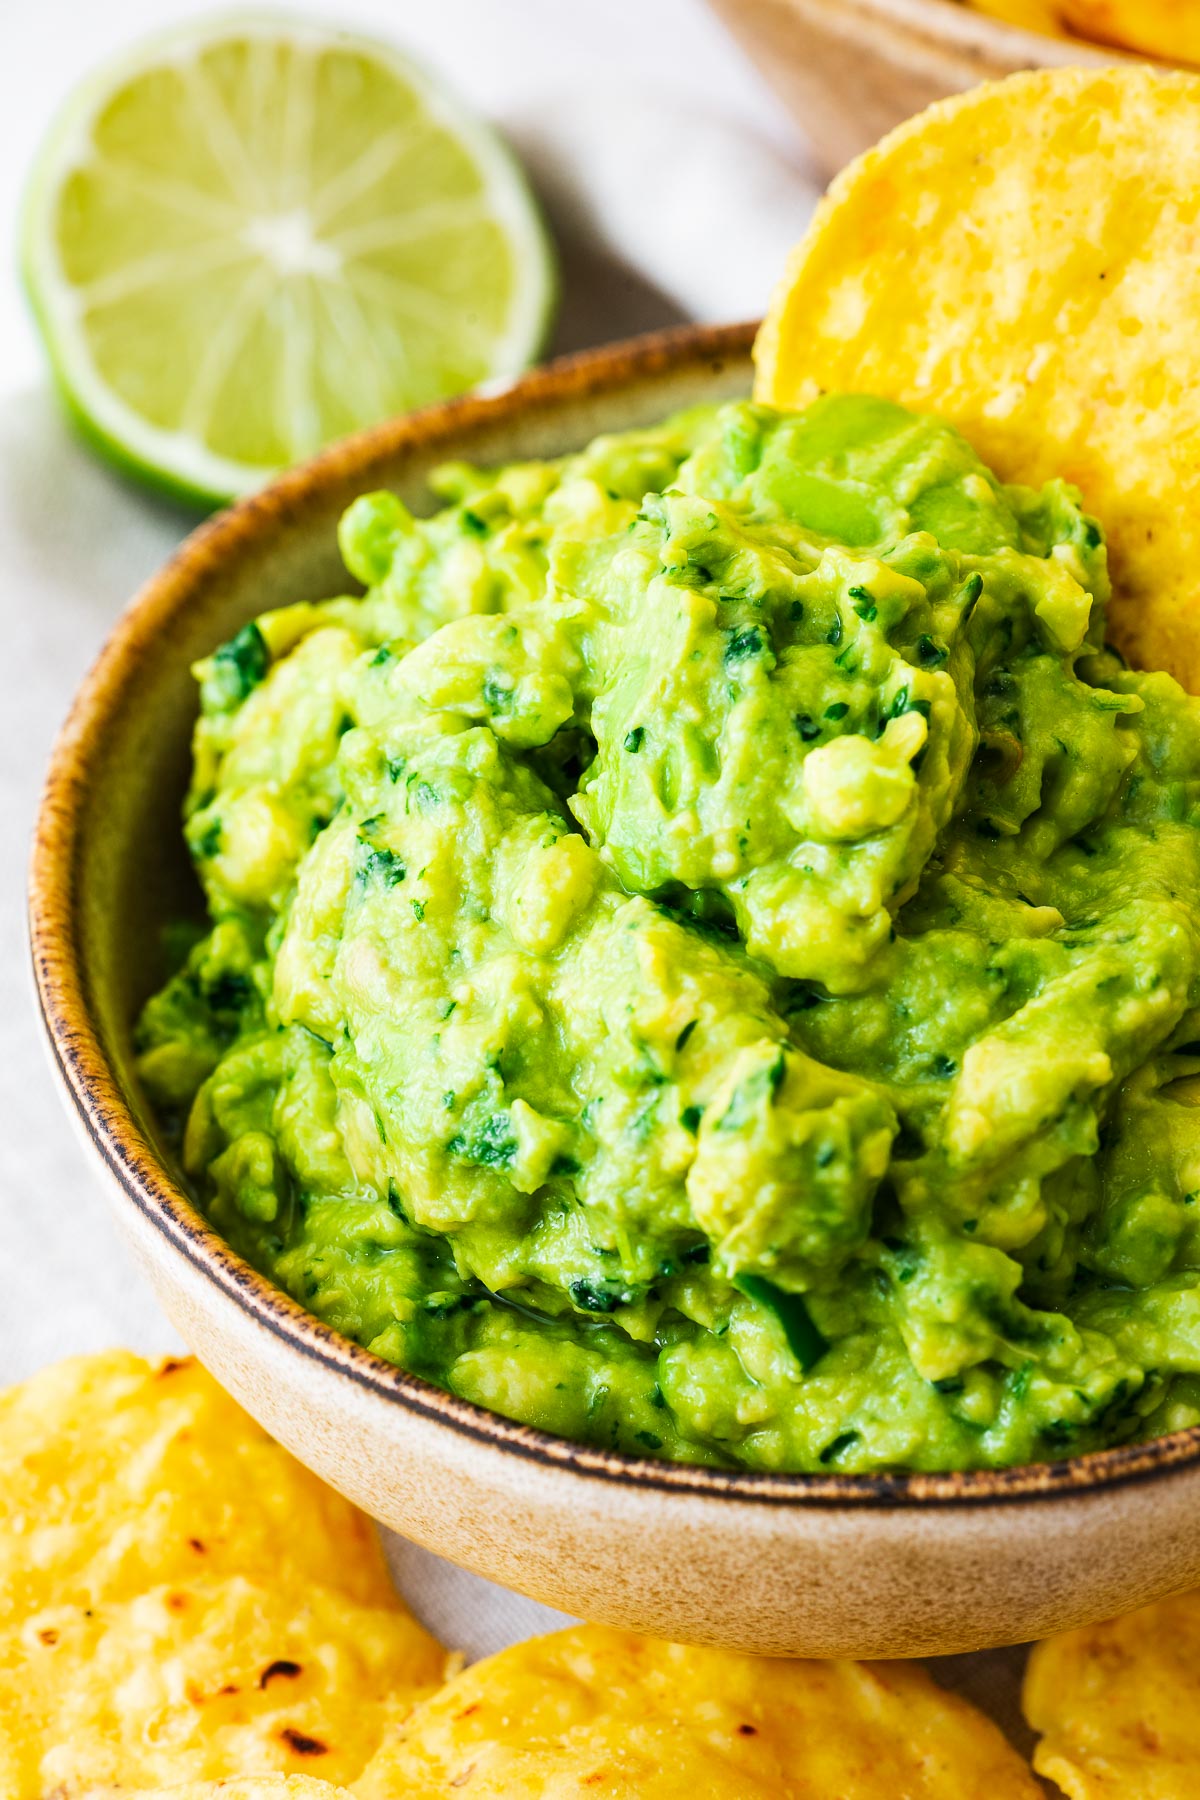 How Long Does Guacamole Last? (+ Storage Tips)